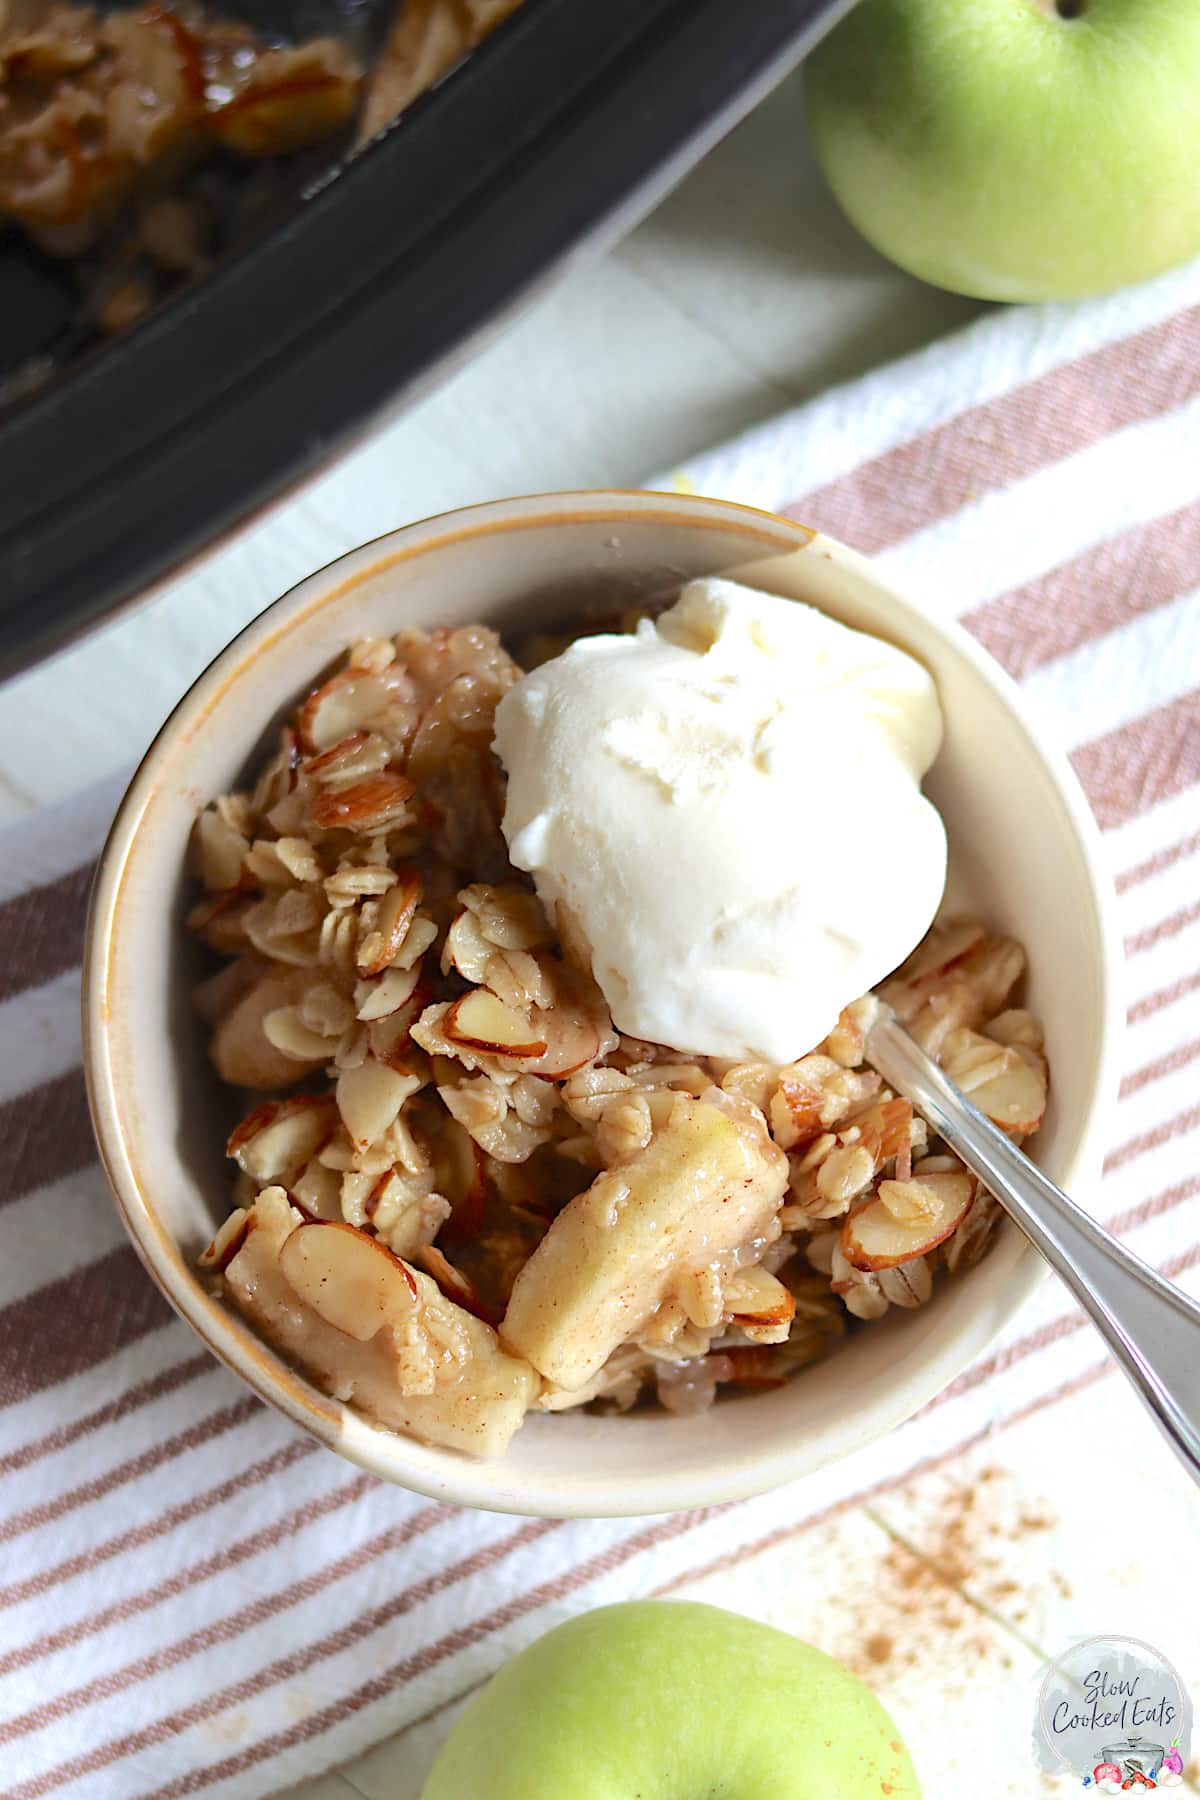 An off white bowl served with slow cooker apple crisp.